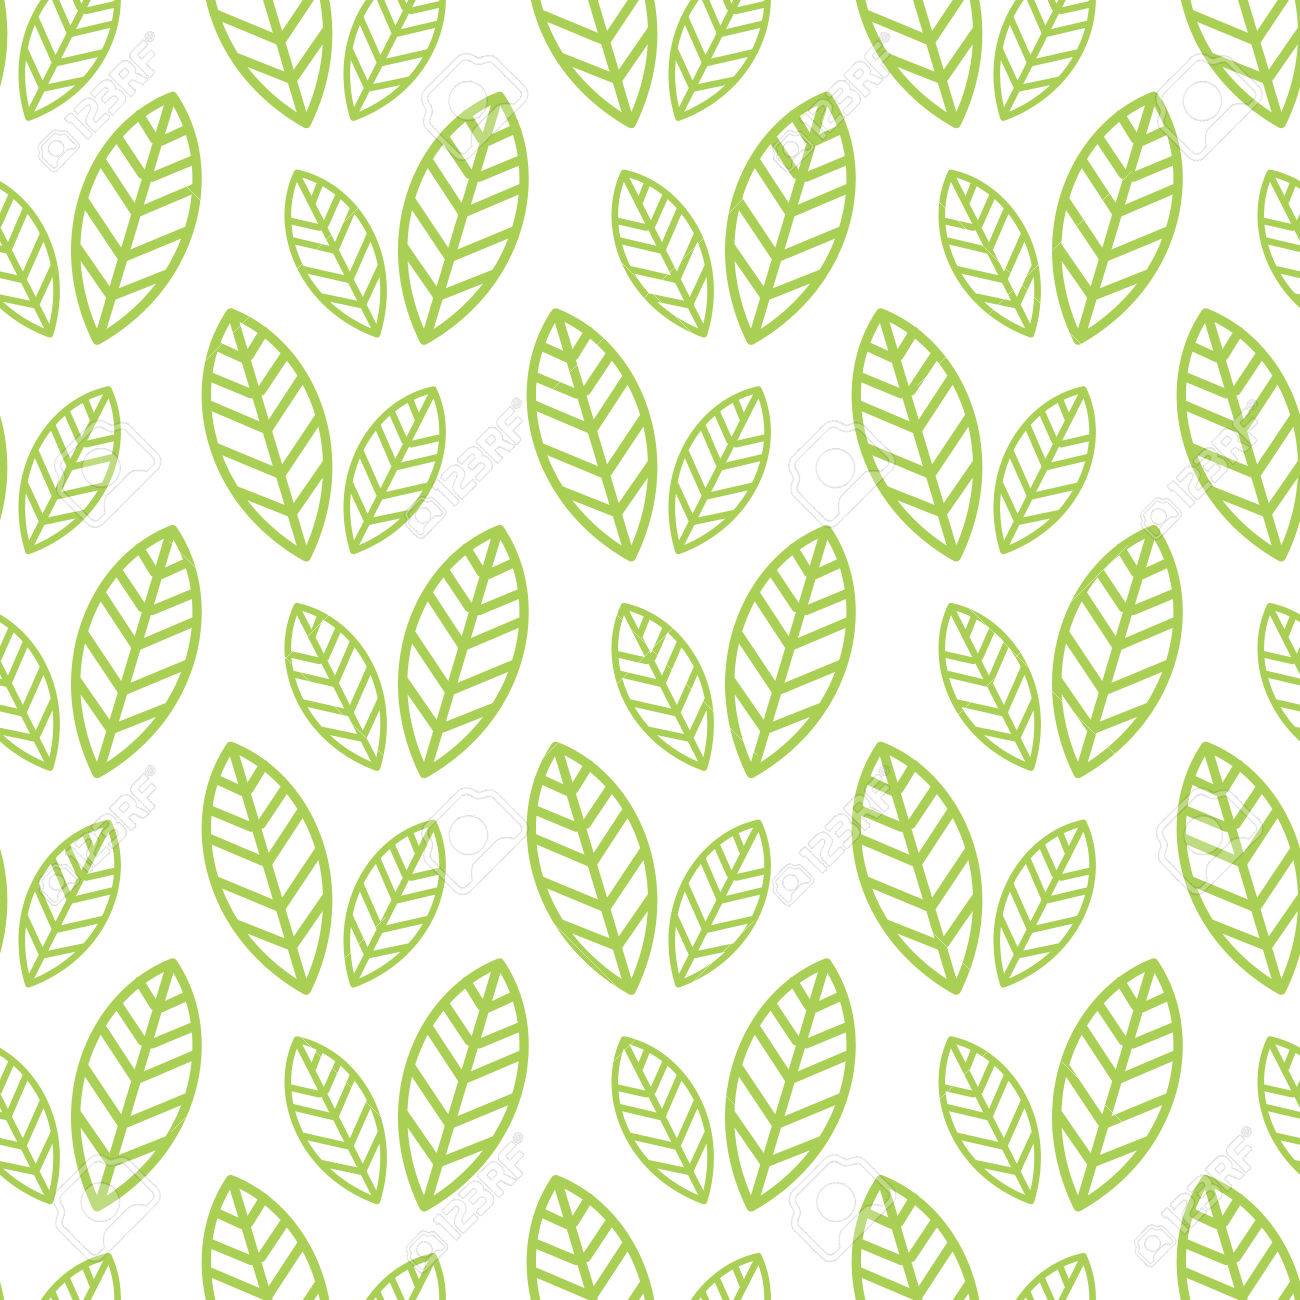 Simple Seamless Anic Wallpaper With A Pattern Of Green Leaves